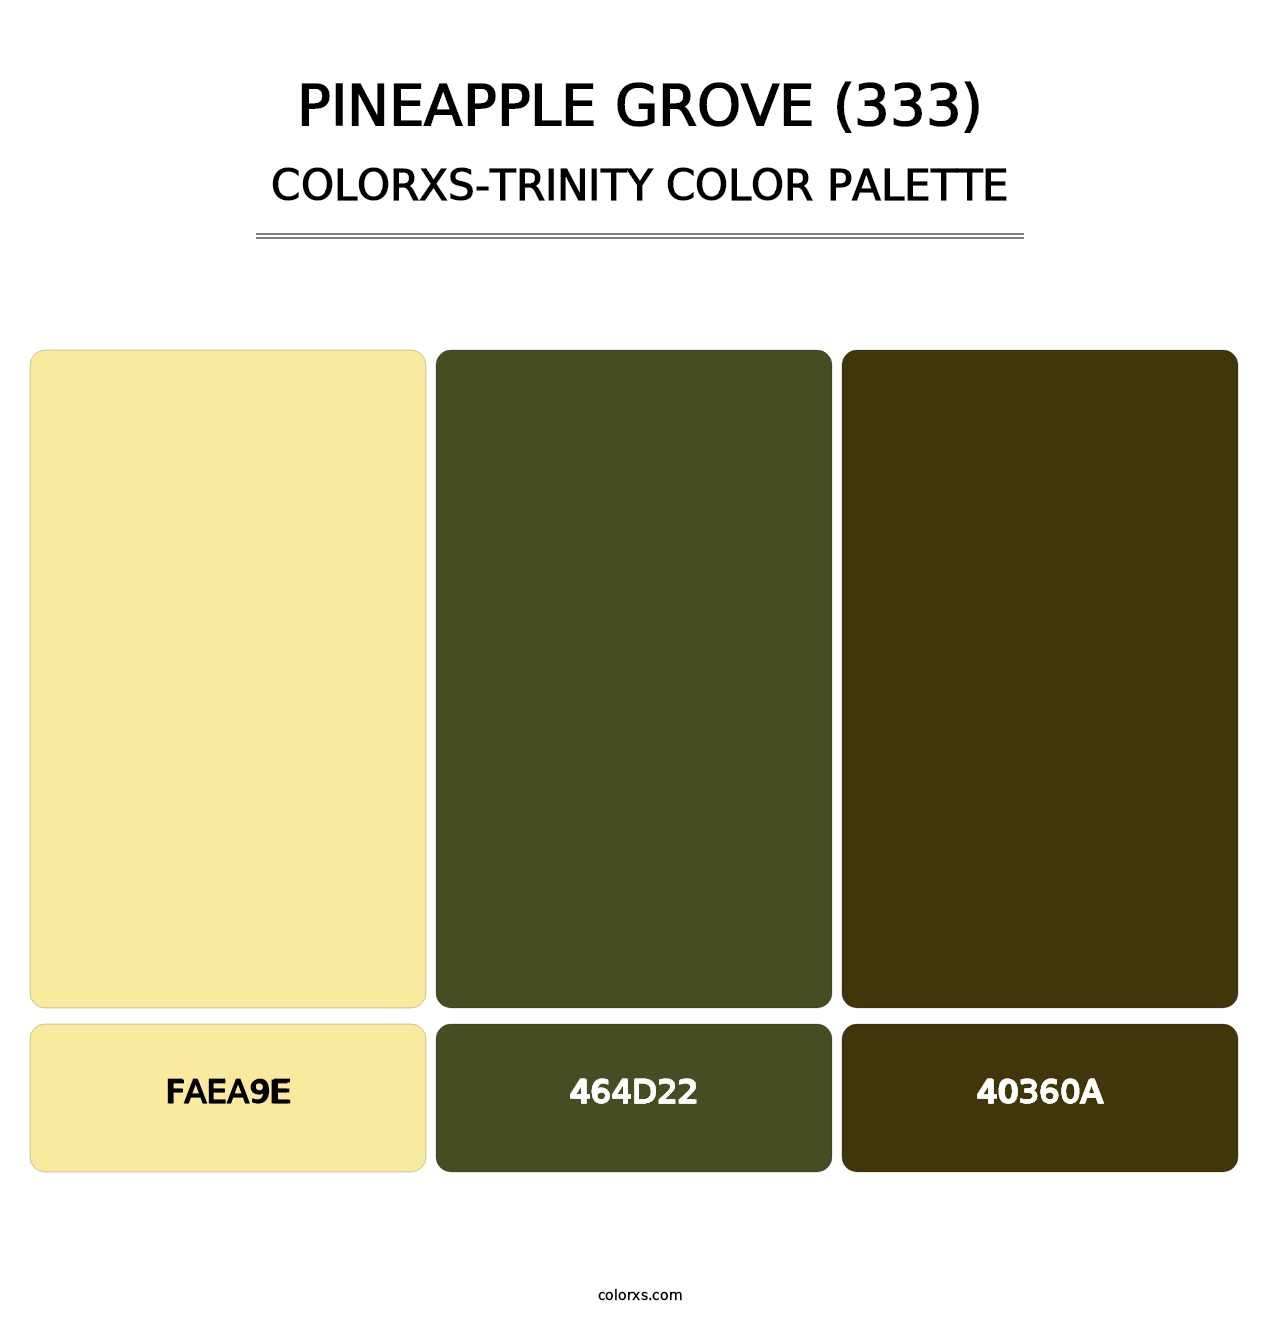 Pineapple Grove (333) - Colorxs Trinity Palette